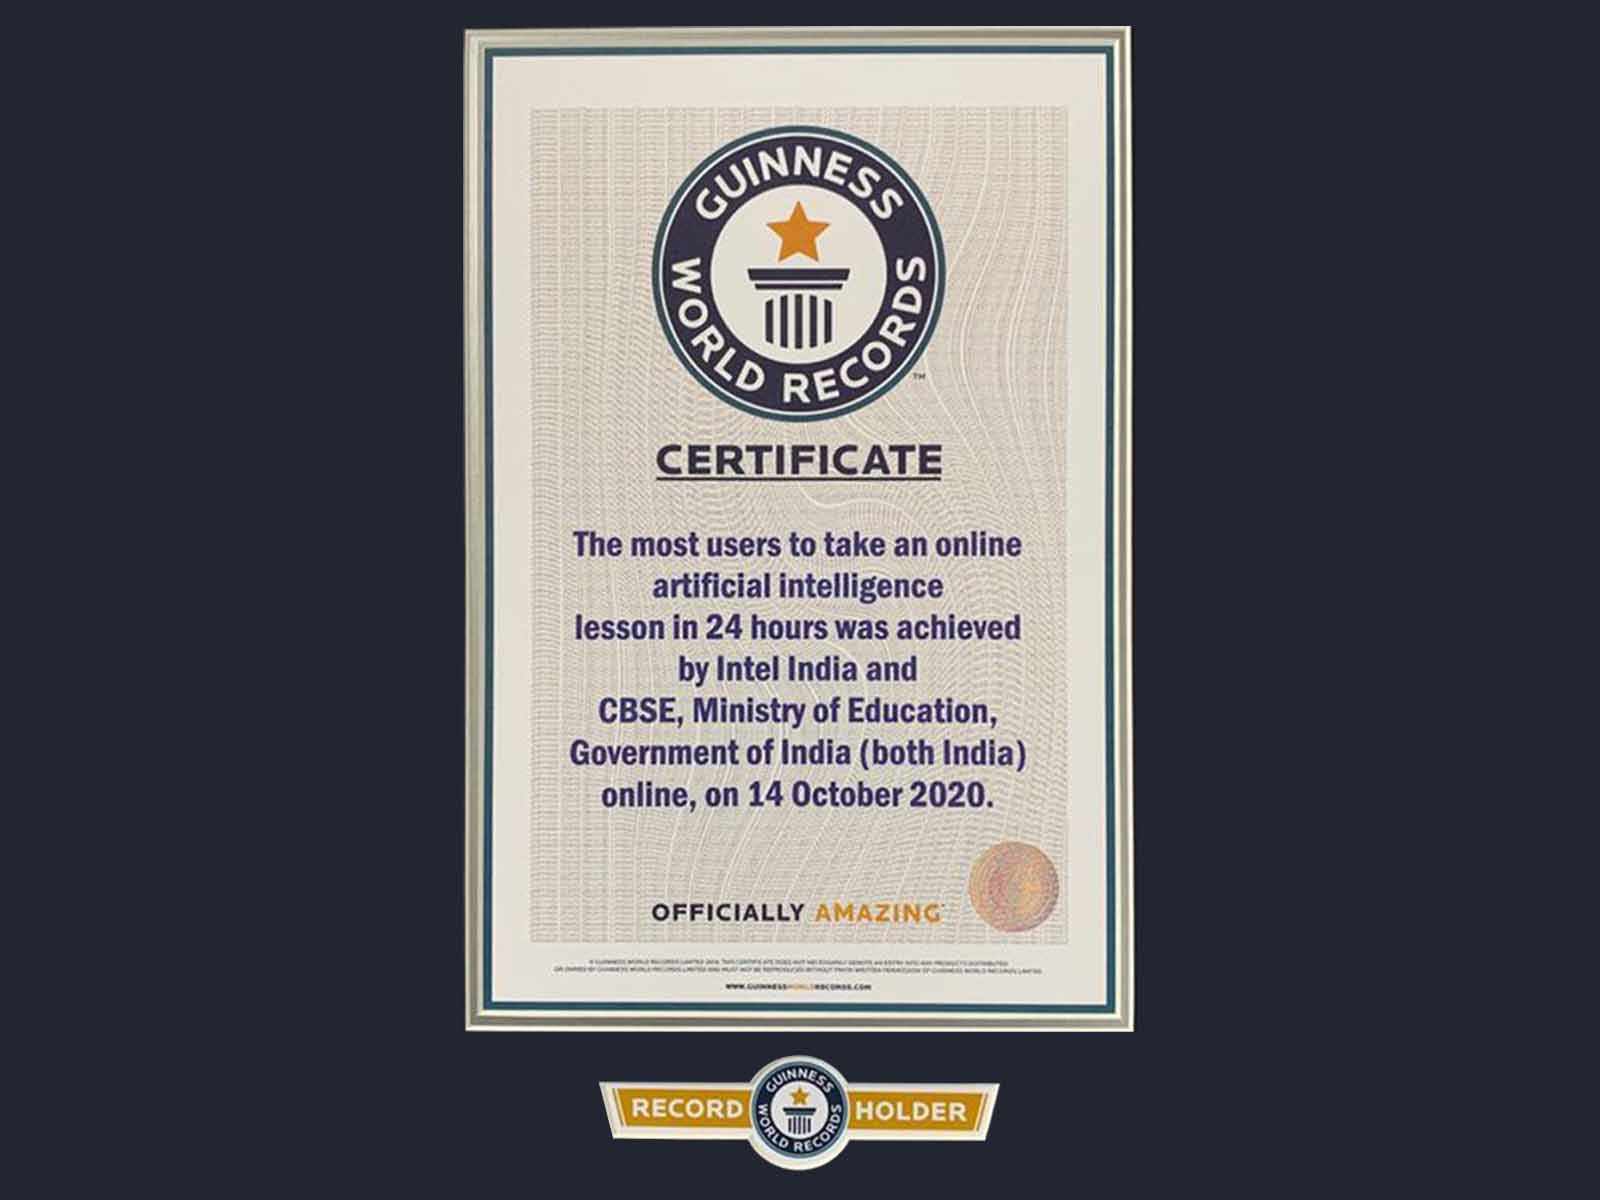 CBSE & Intel Set Guinness World Records For Delivering Virtual Lesson